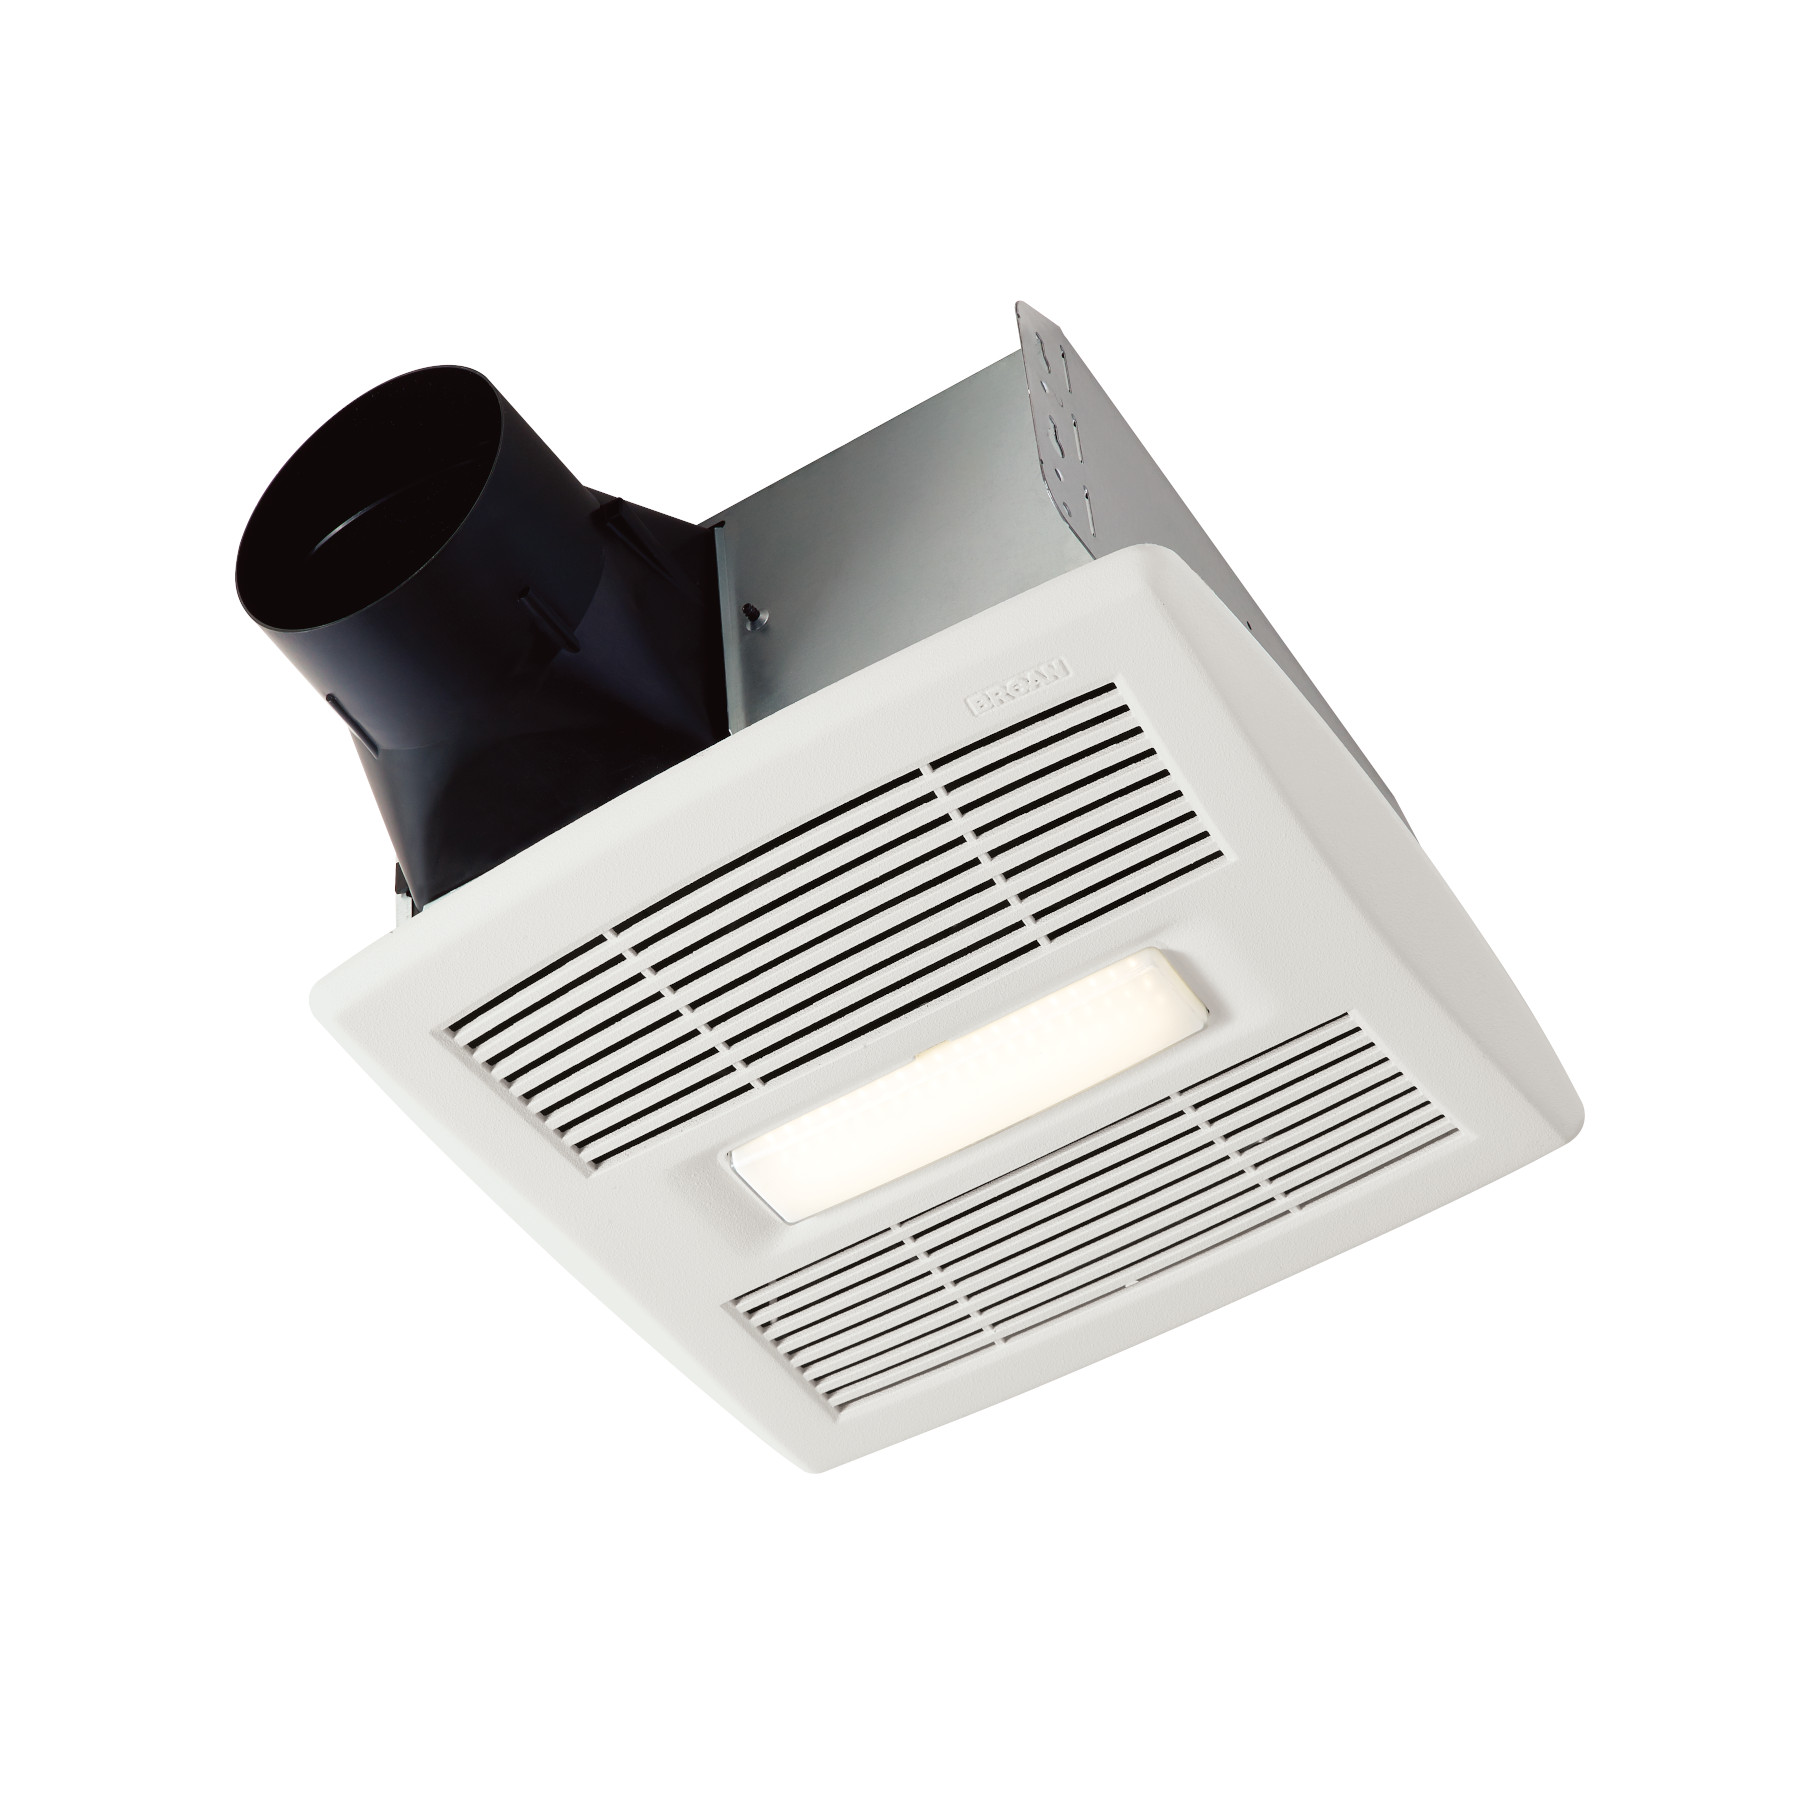 **DISCONTINUED** Broan® 90 CFM Ventilation Fan with LED Light, 1.0 Sones; ENERGY STAR Certified